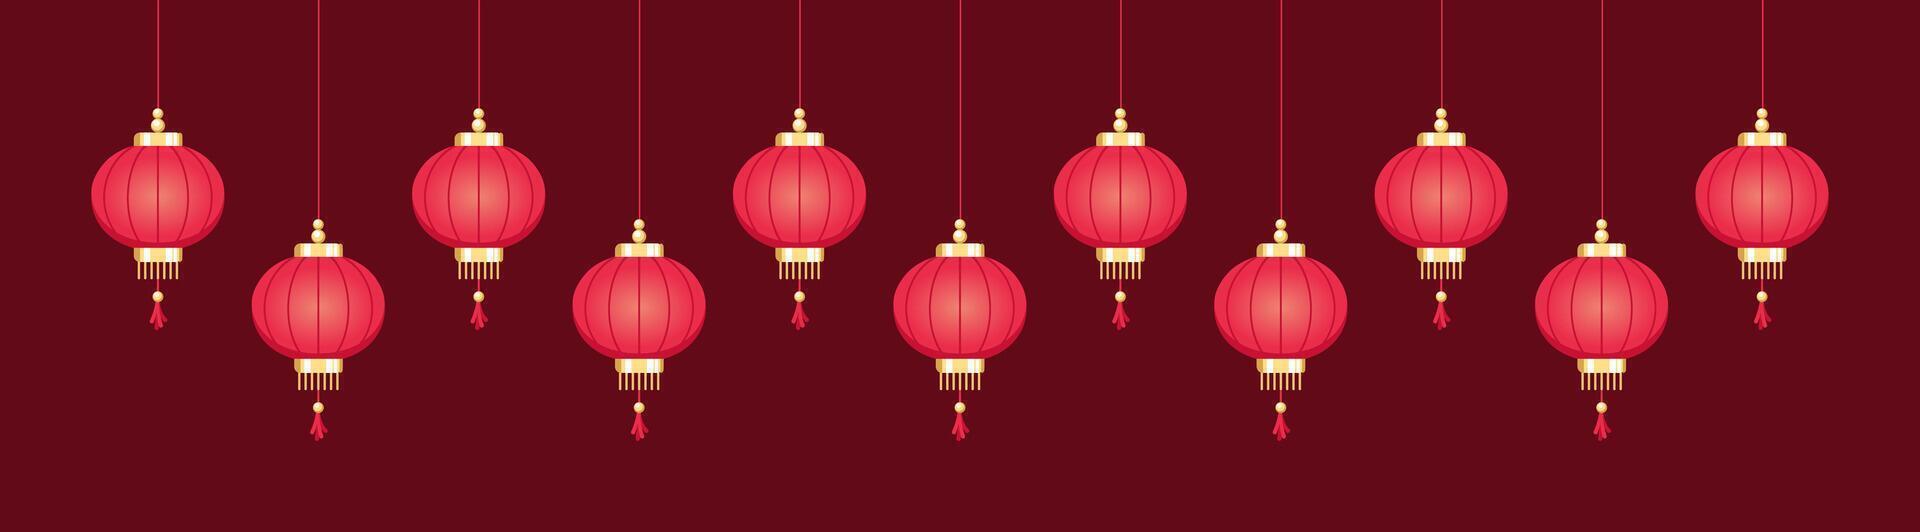 Hanging Chinese Lanterns Banner Border, Lunar New Year and Mid-Autumn Festival Graphic vector